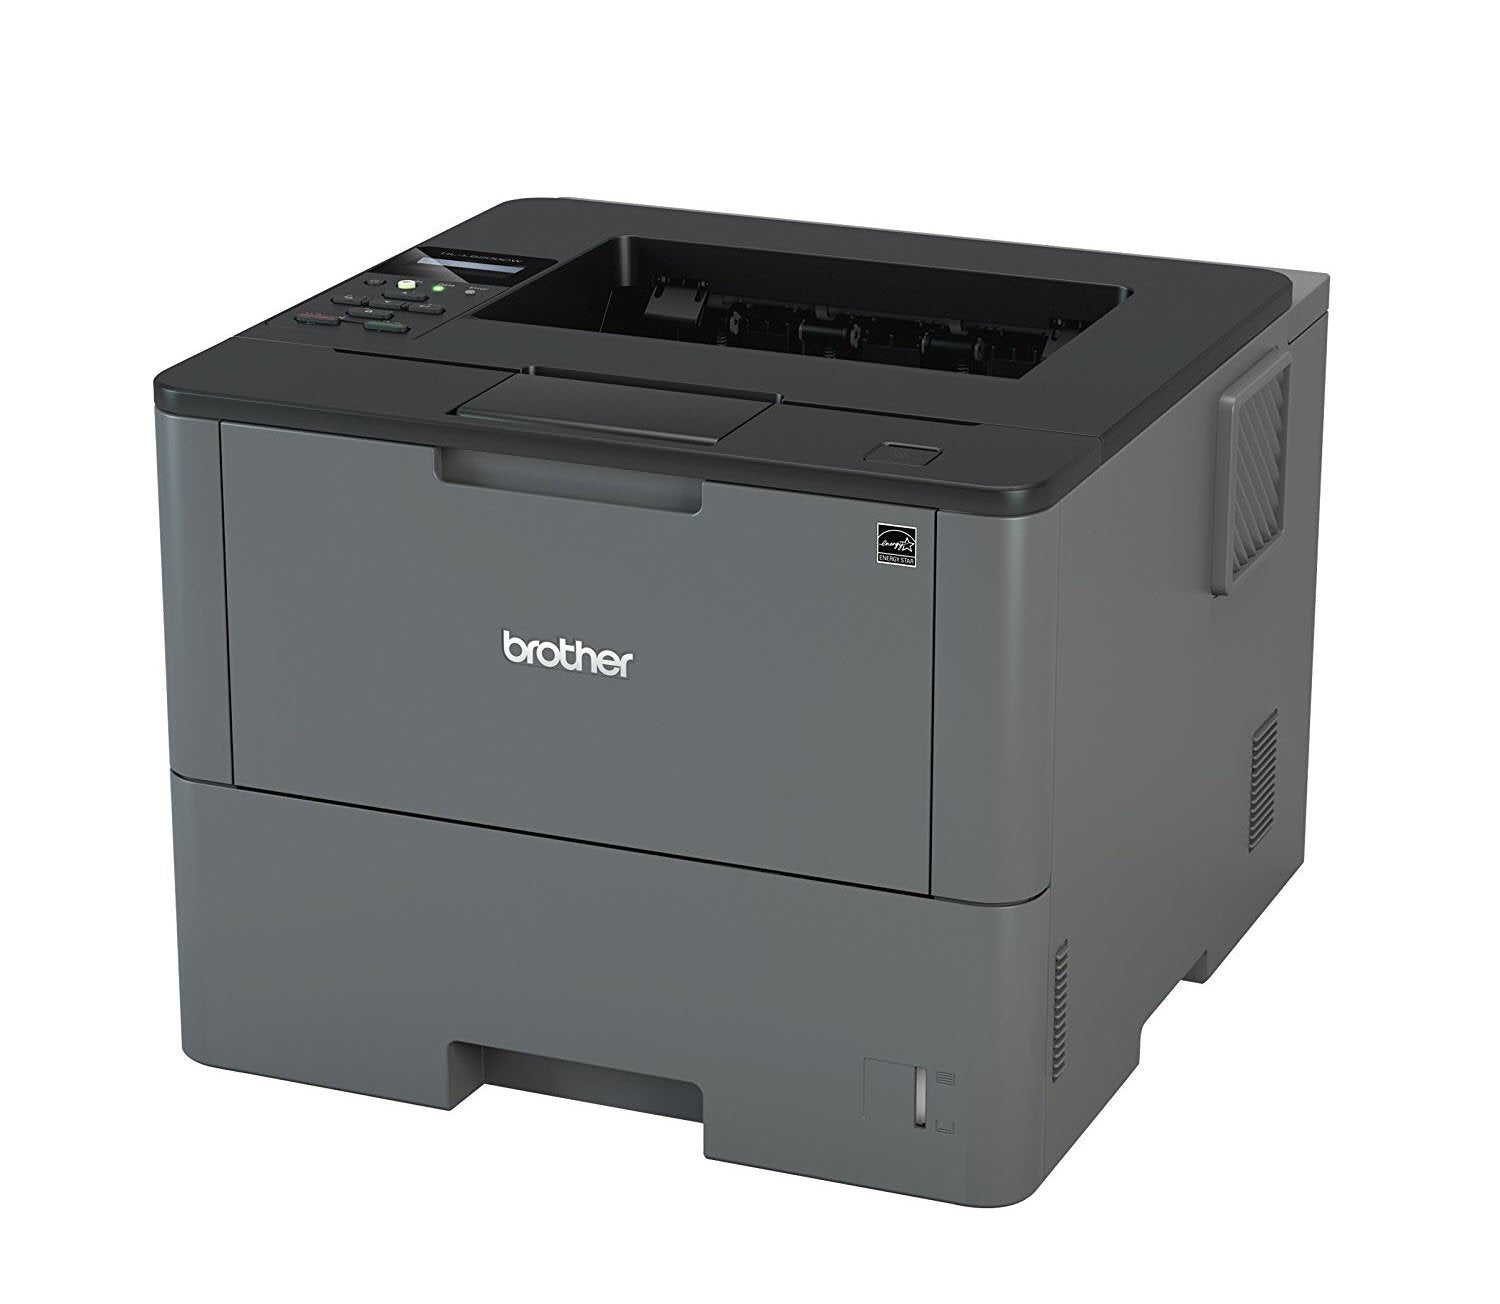 Brother HLL6200DW Wireless Monochrome Laser Printer with Large Paper Capacity